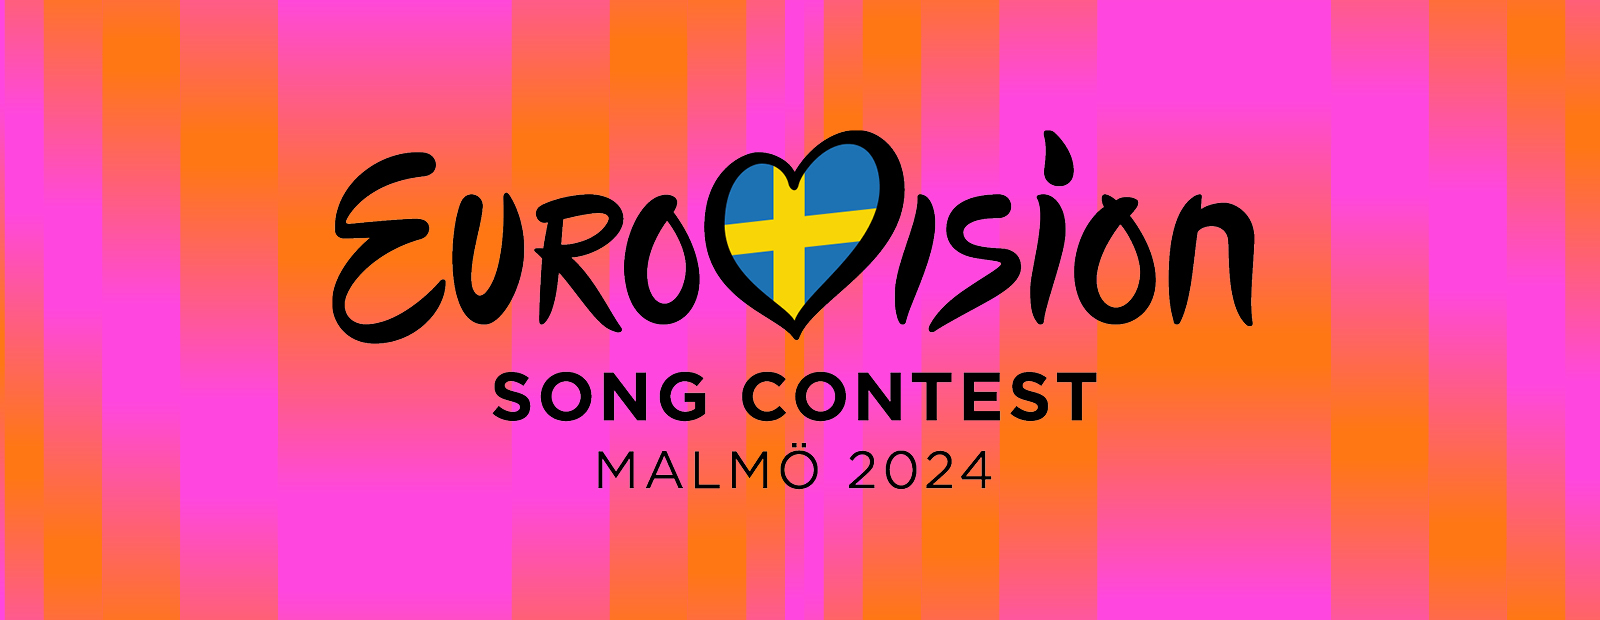 Eurovision Song Contest 2024 Grand Final - Afternoon Preview